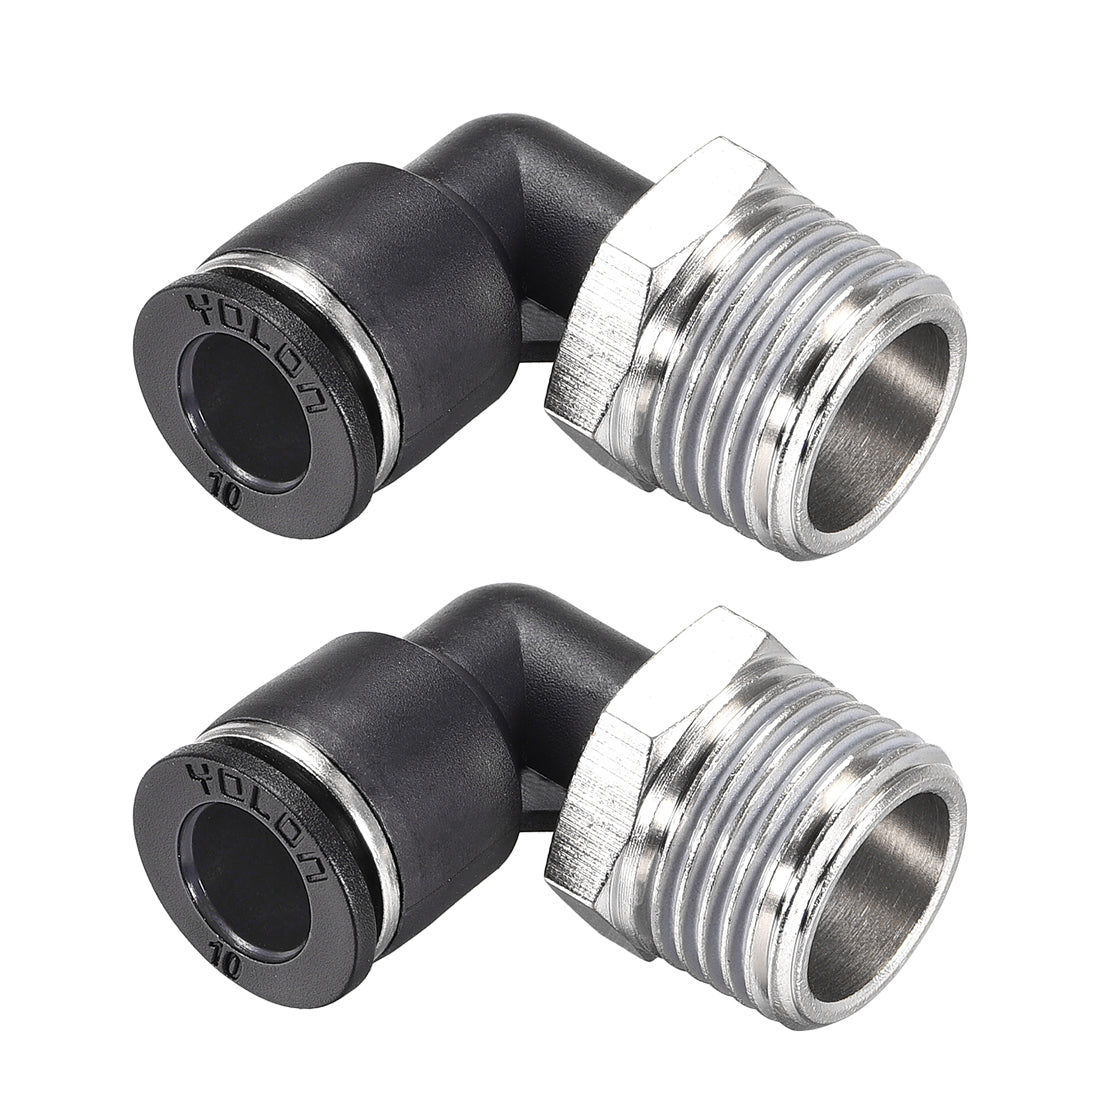 uxcell Uxcell Push to Connect Tube Fitting Male Elbow 10mm Tube OD x 1/2 NPT Thread Pneumatic Air Push Fit Lock Fitting 2pcs